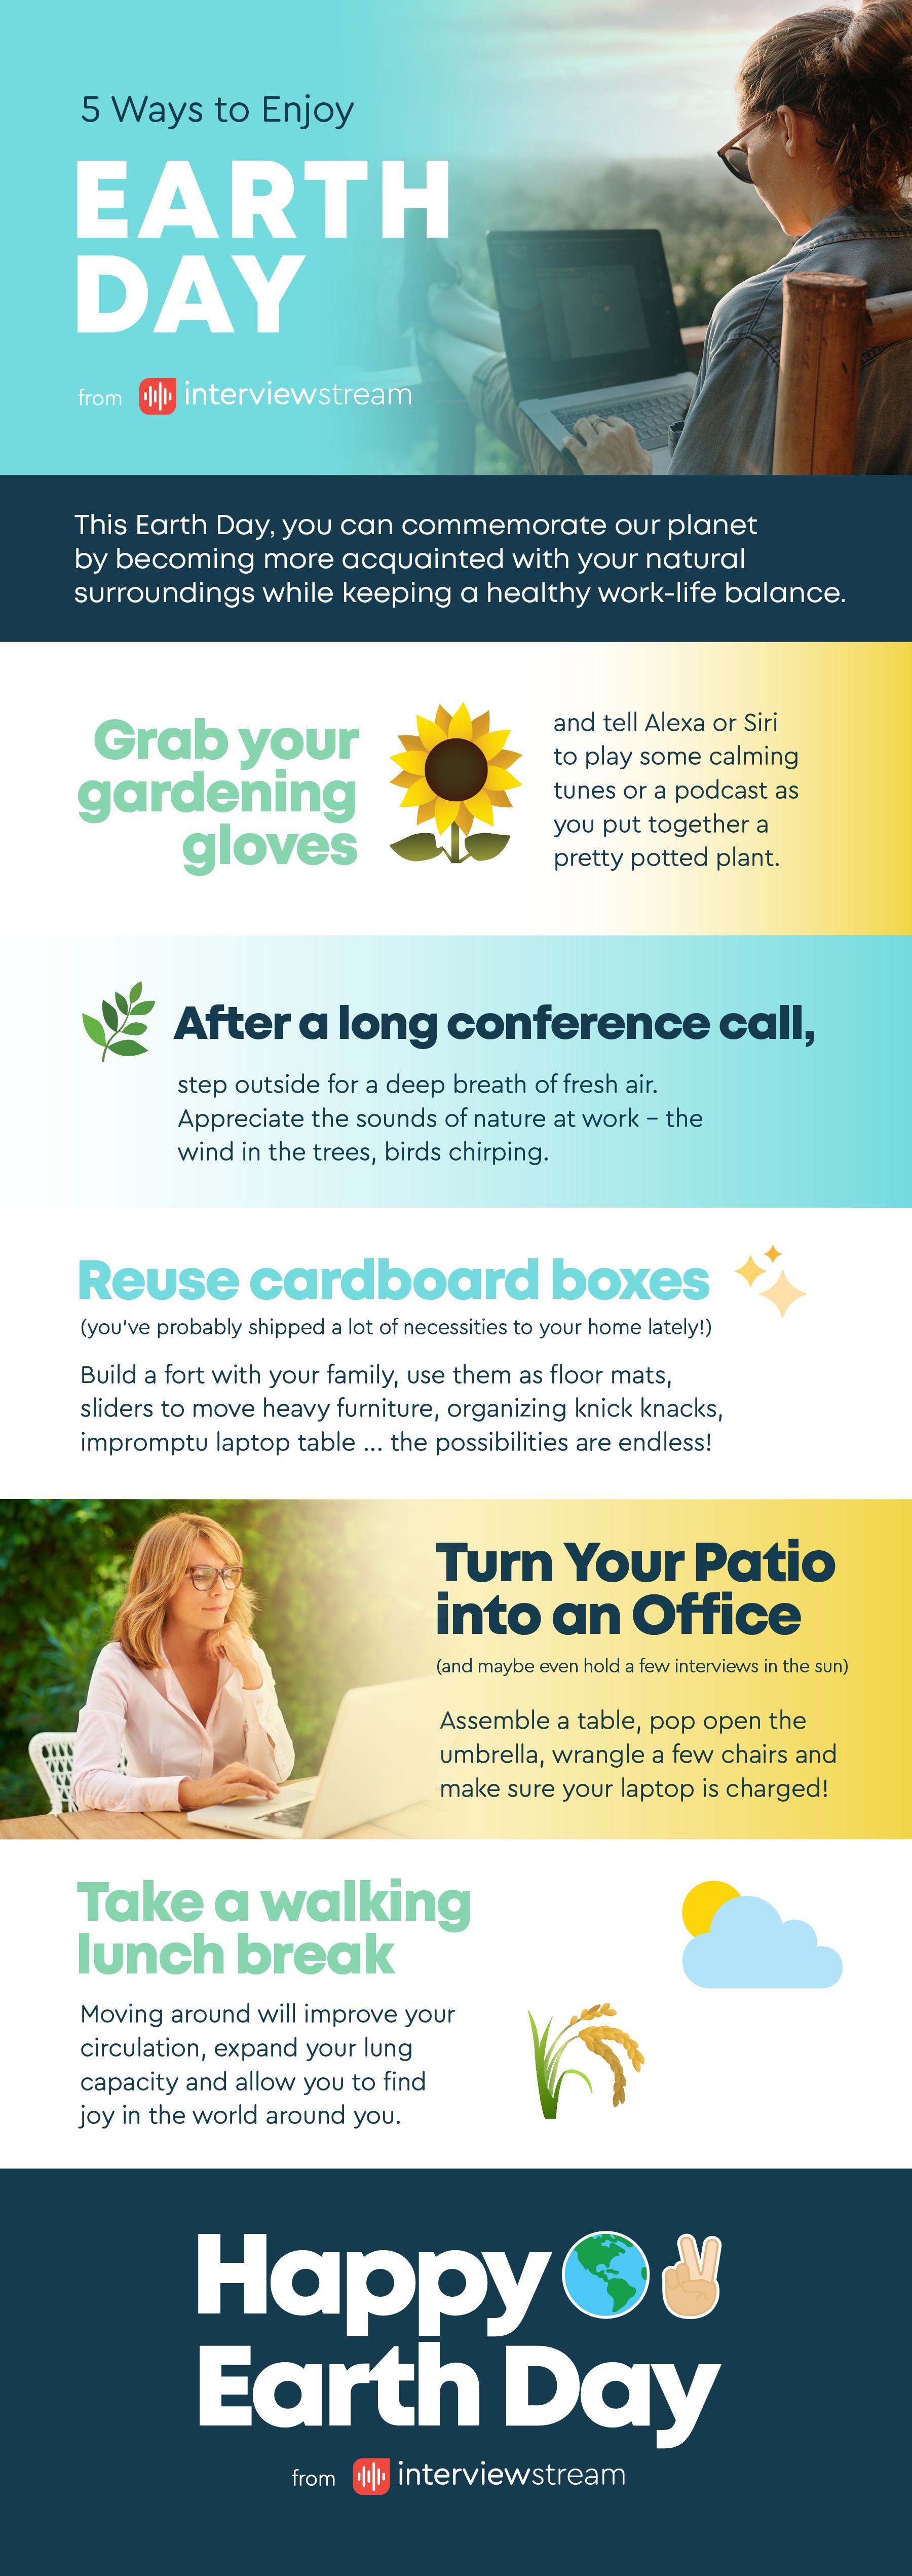 Infographic providing some tips and activities to maintain a healthy work-life balance